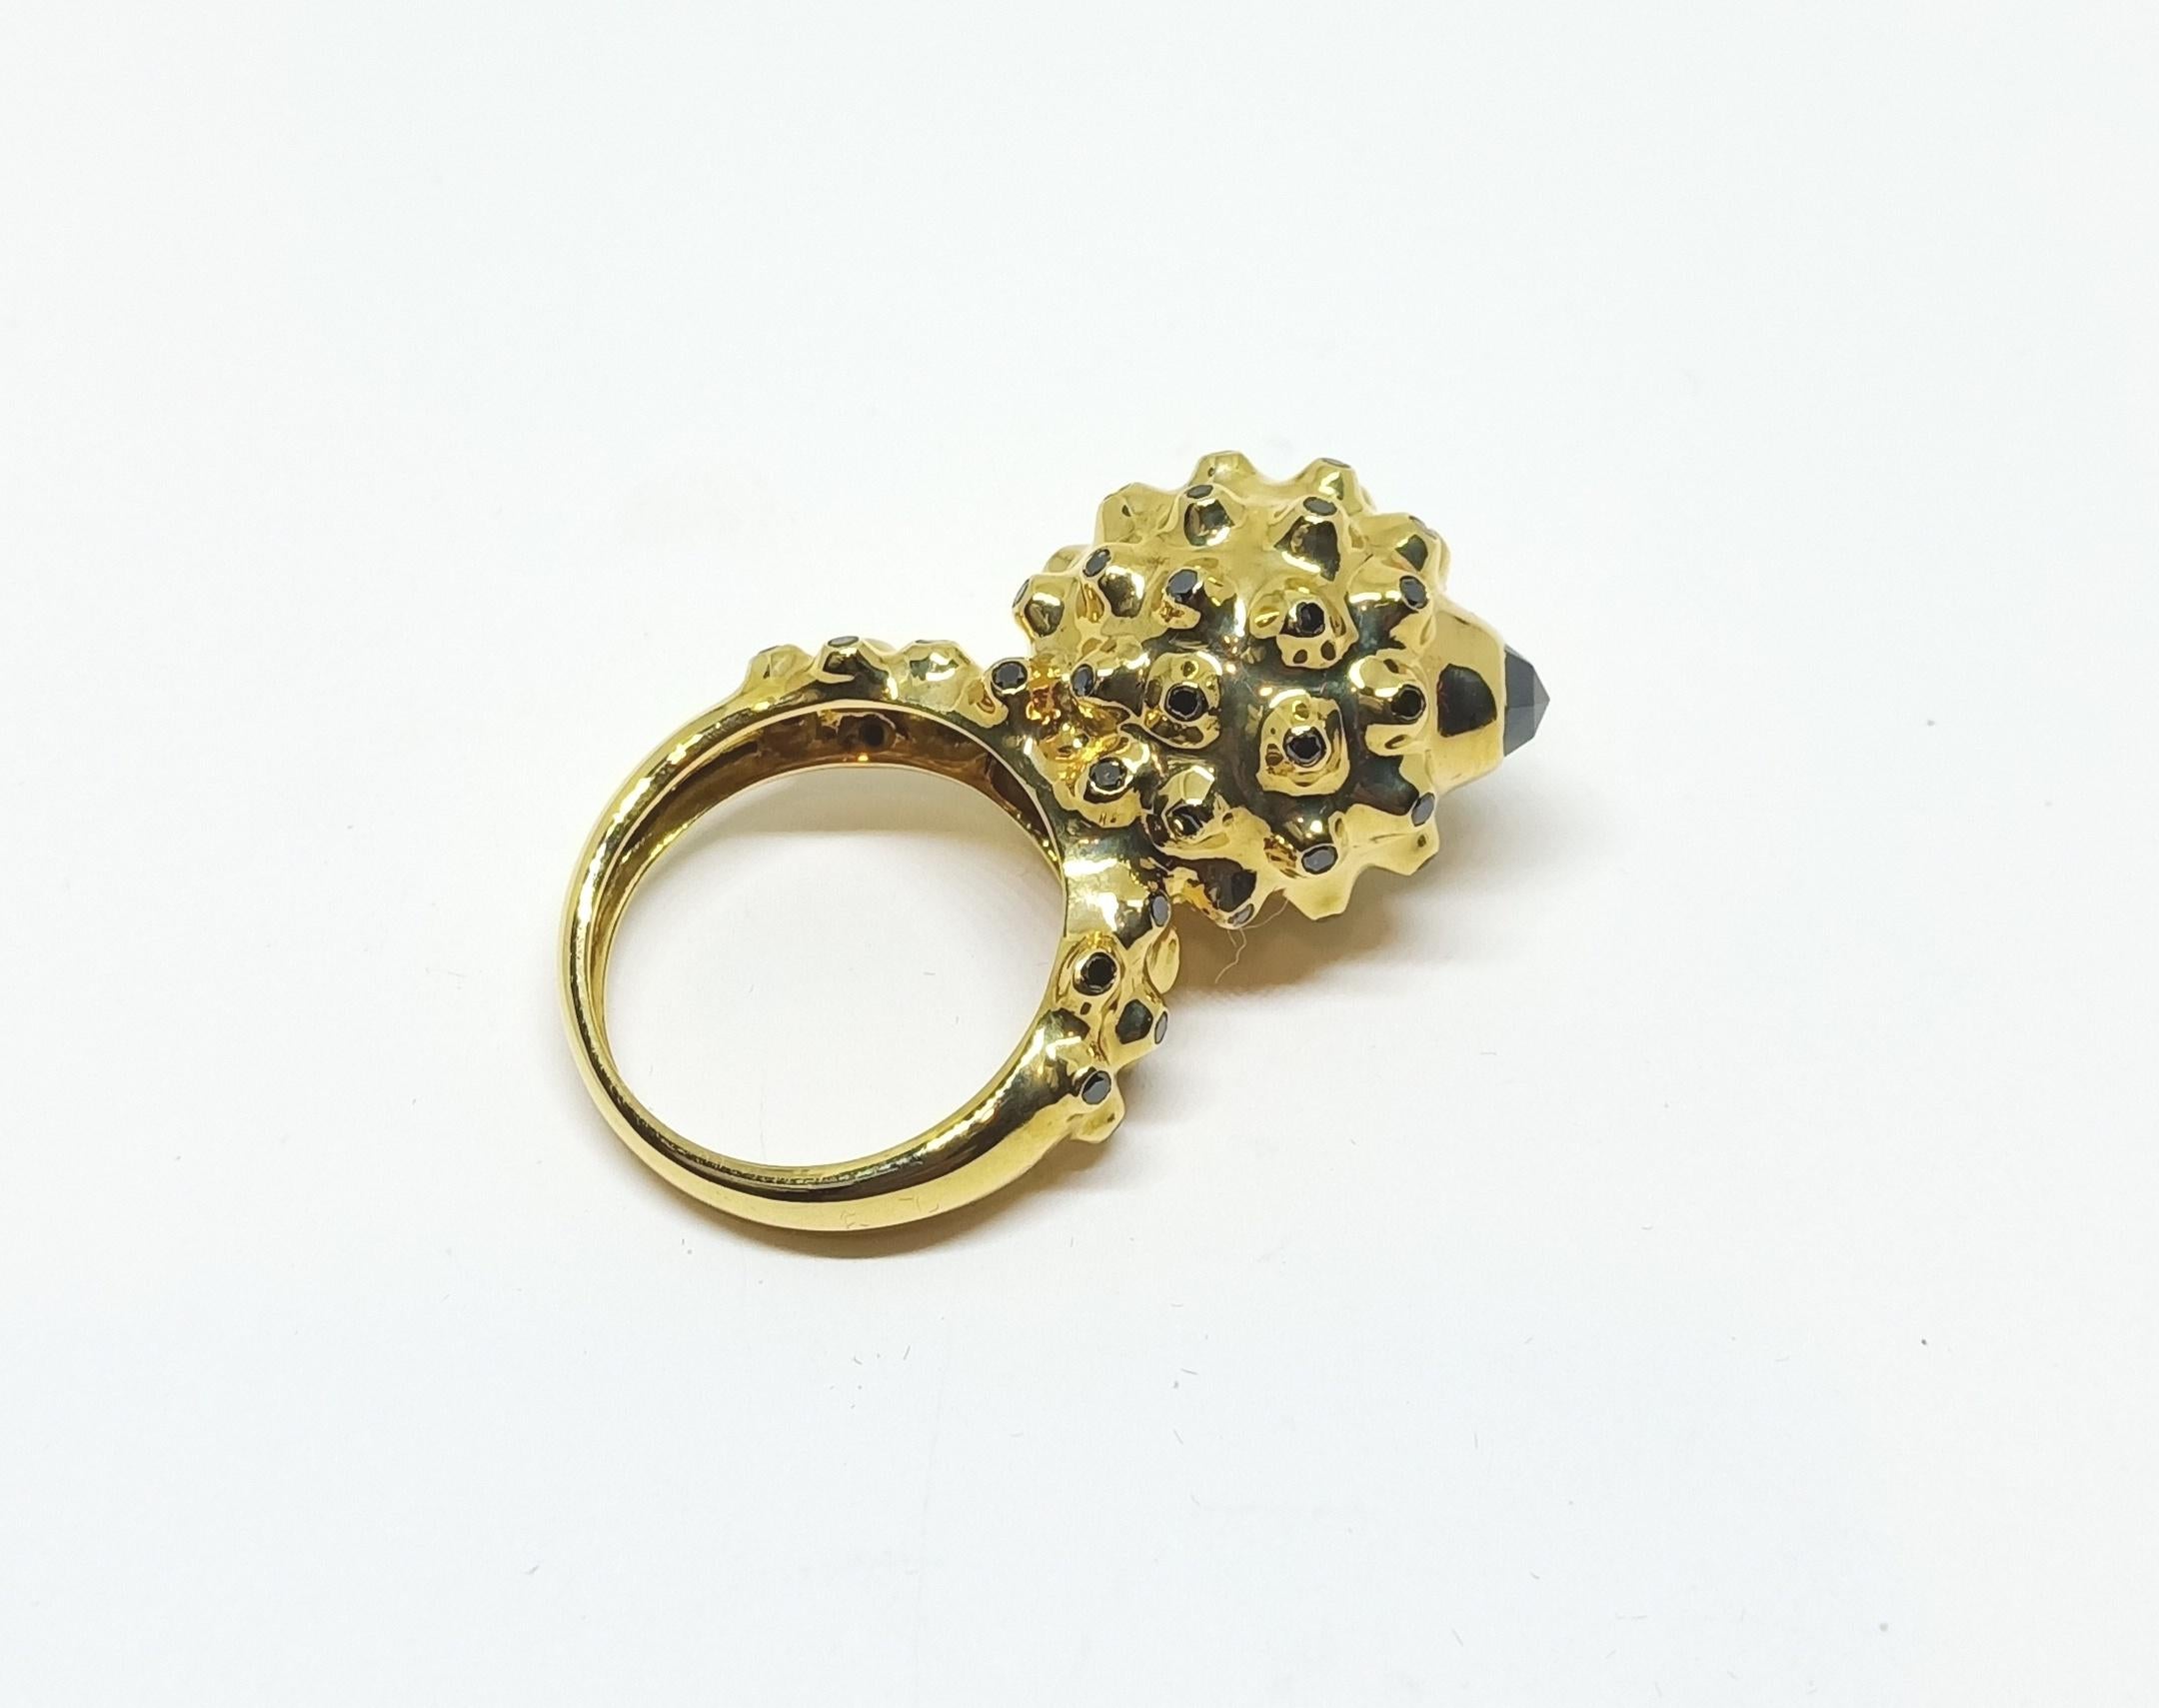 Contemporary Coveted friends will Envy You with One of a Kind Black Diamond Gold Dome Ring For Sale